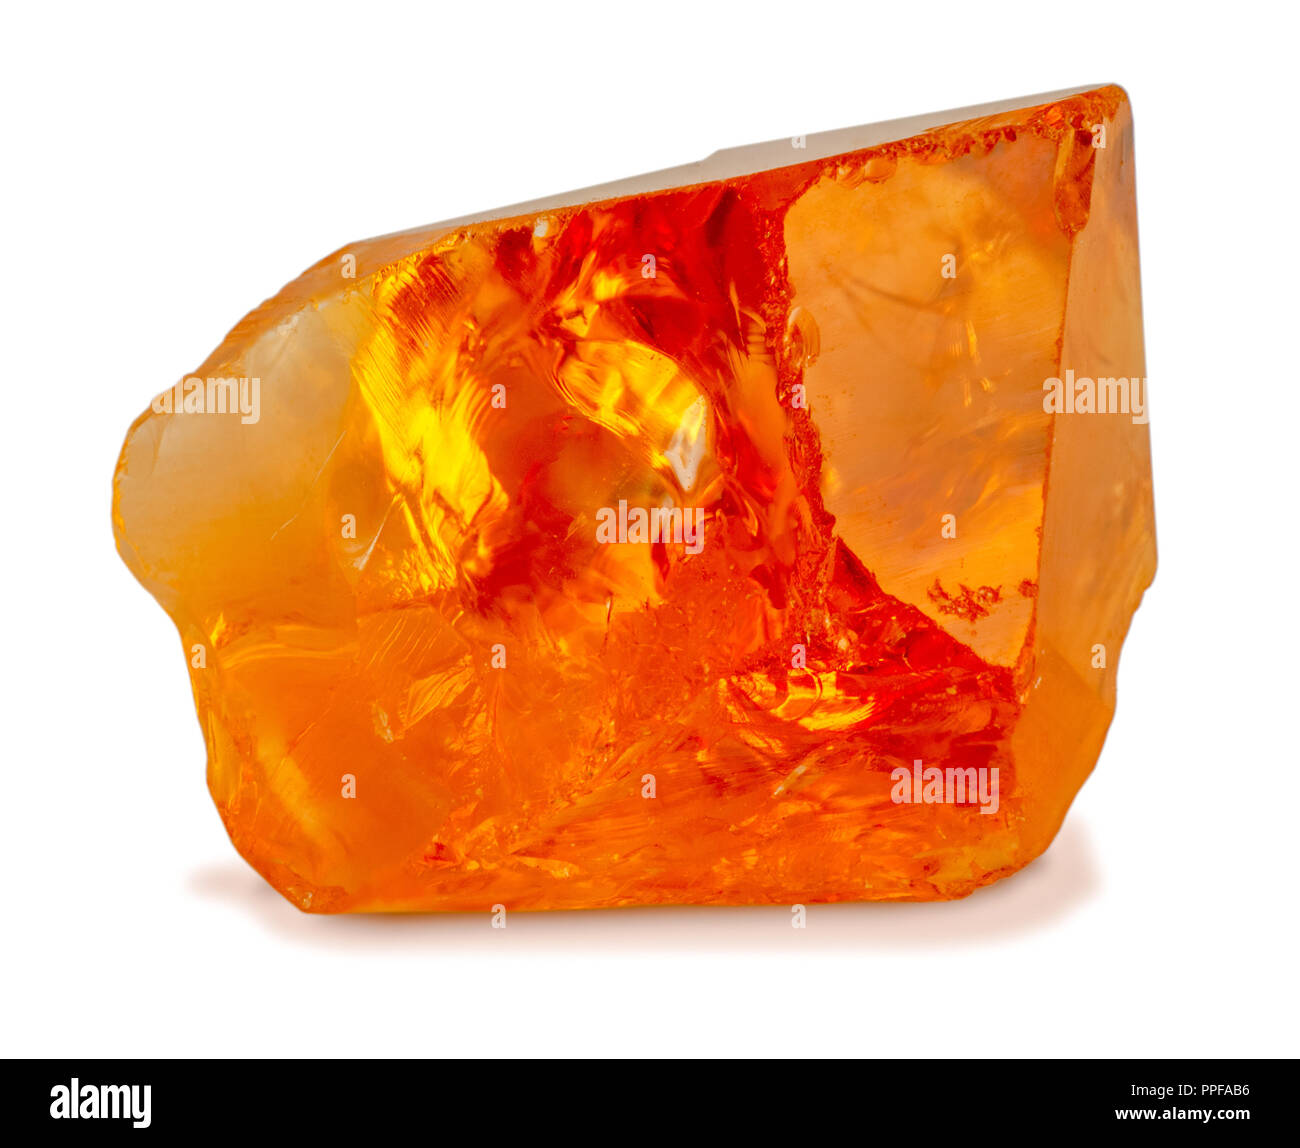 Clear Transparent Citrine Crystal Point Good Saturated Yellow Orange Color High Qualiy Citrine For Gem Cutting Purpose Isolated On White Background Stock Photo Alamy